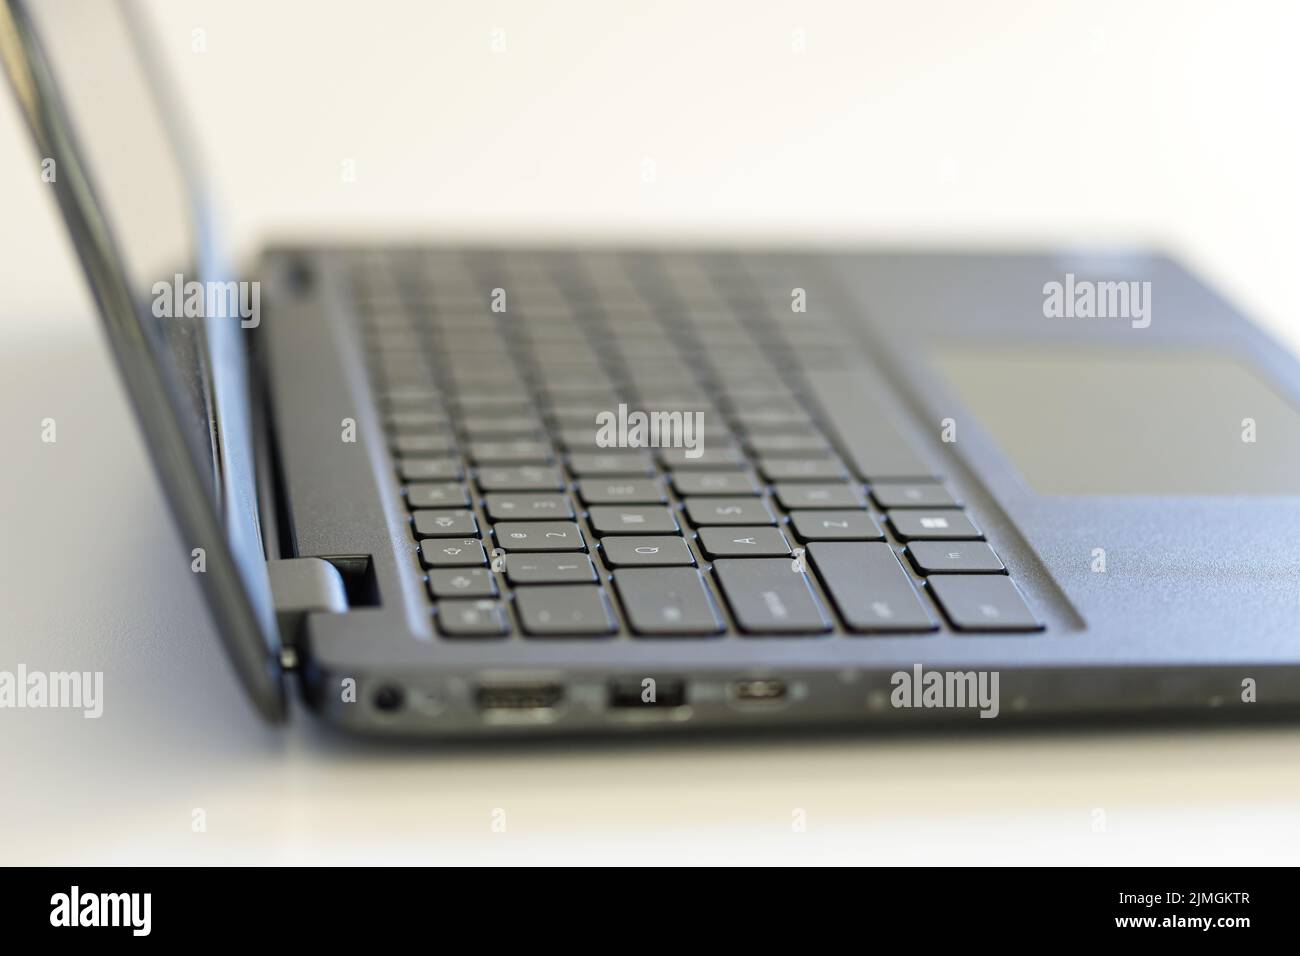 Laptop on white background, shallow depth of field. Stock Photo